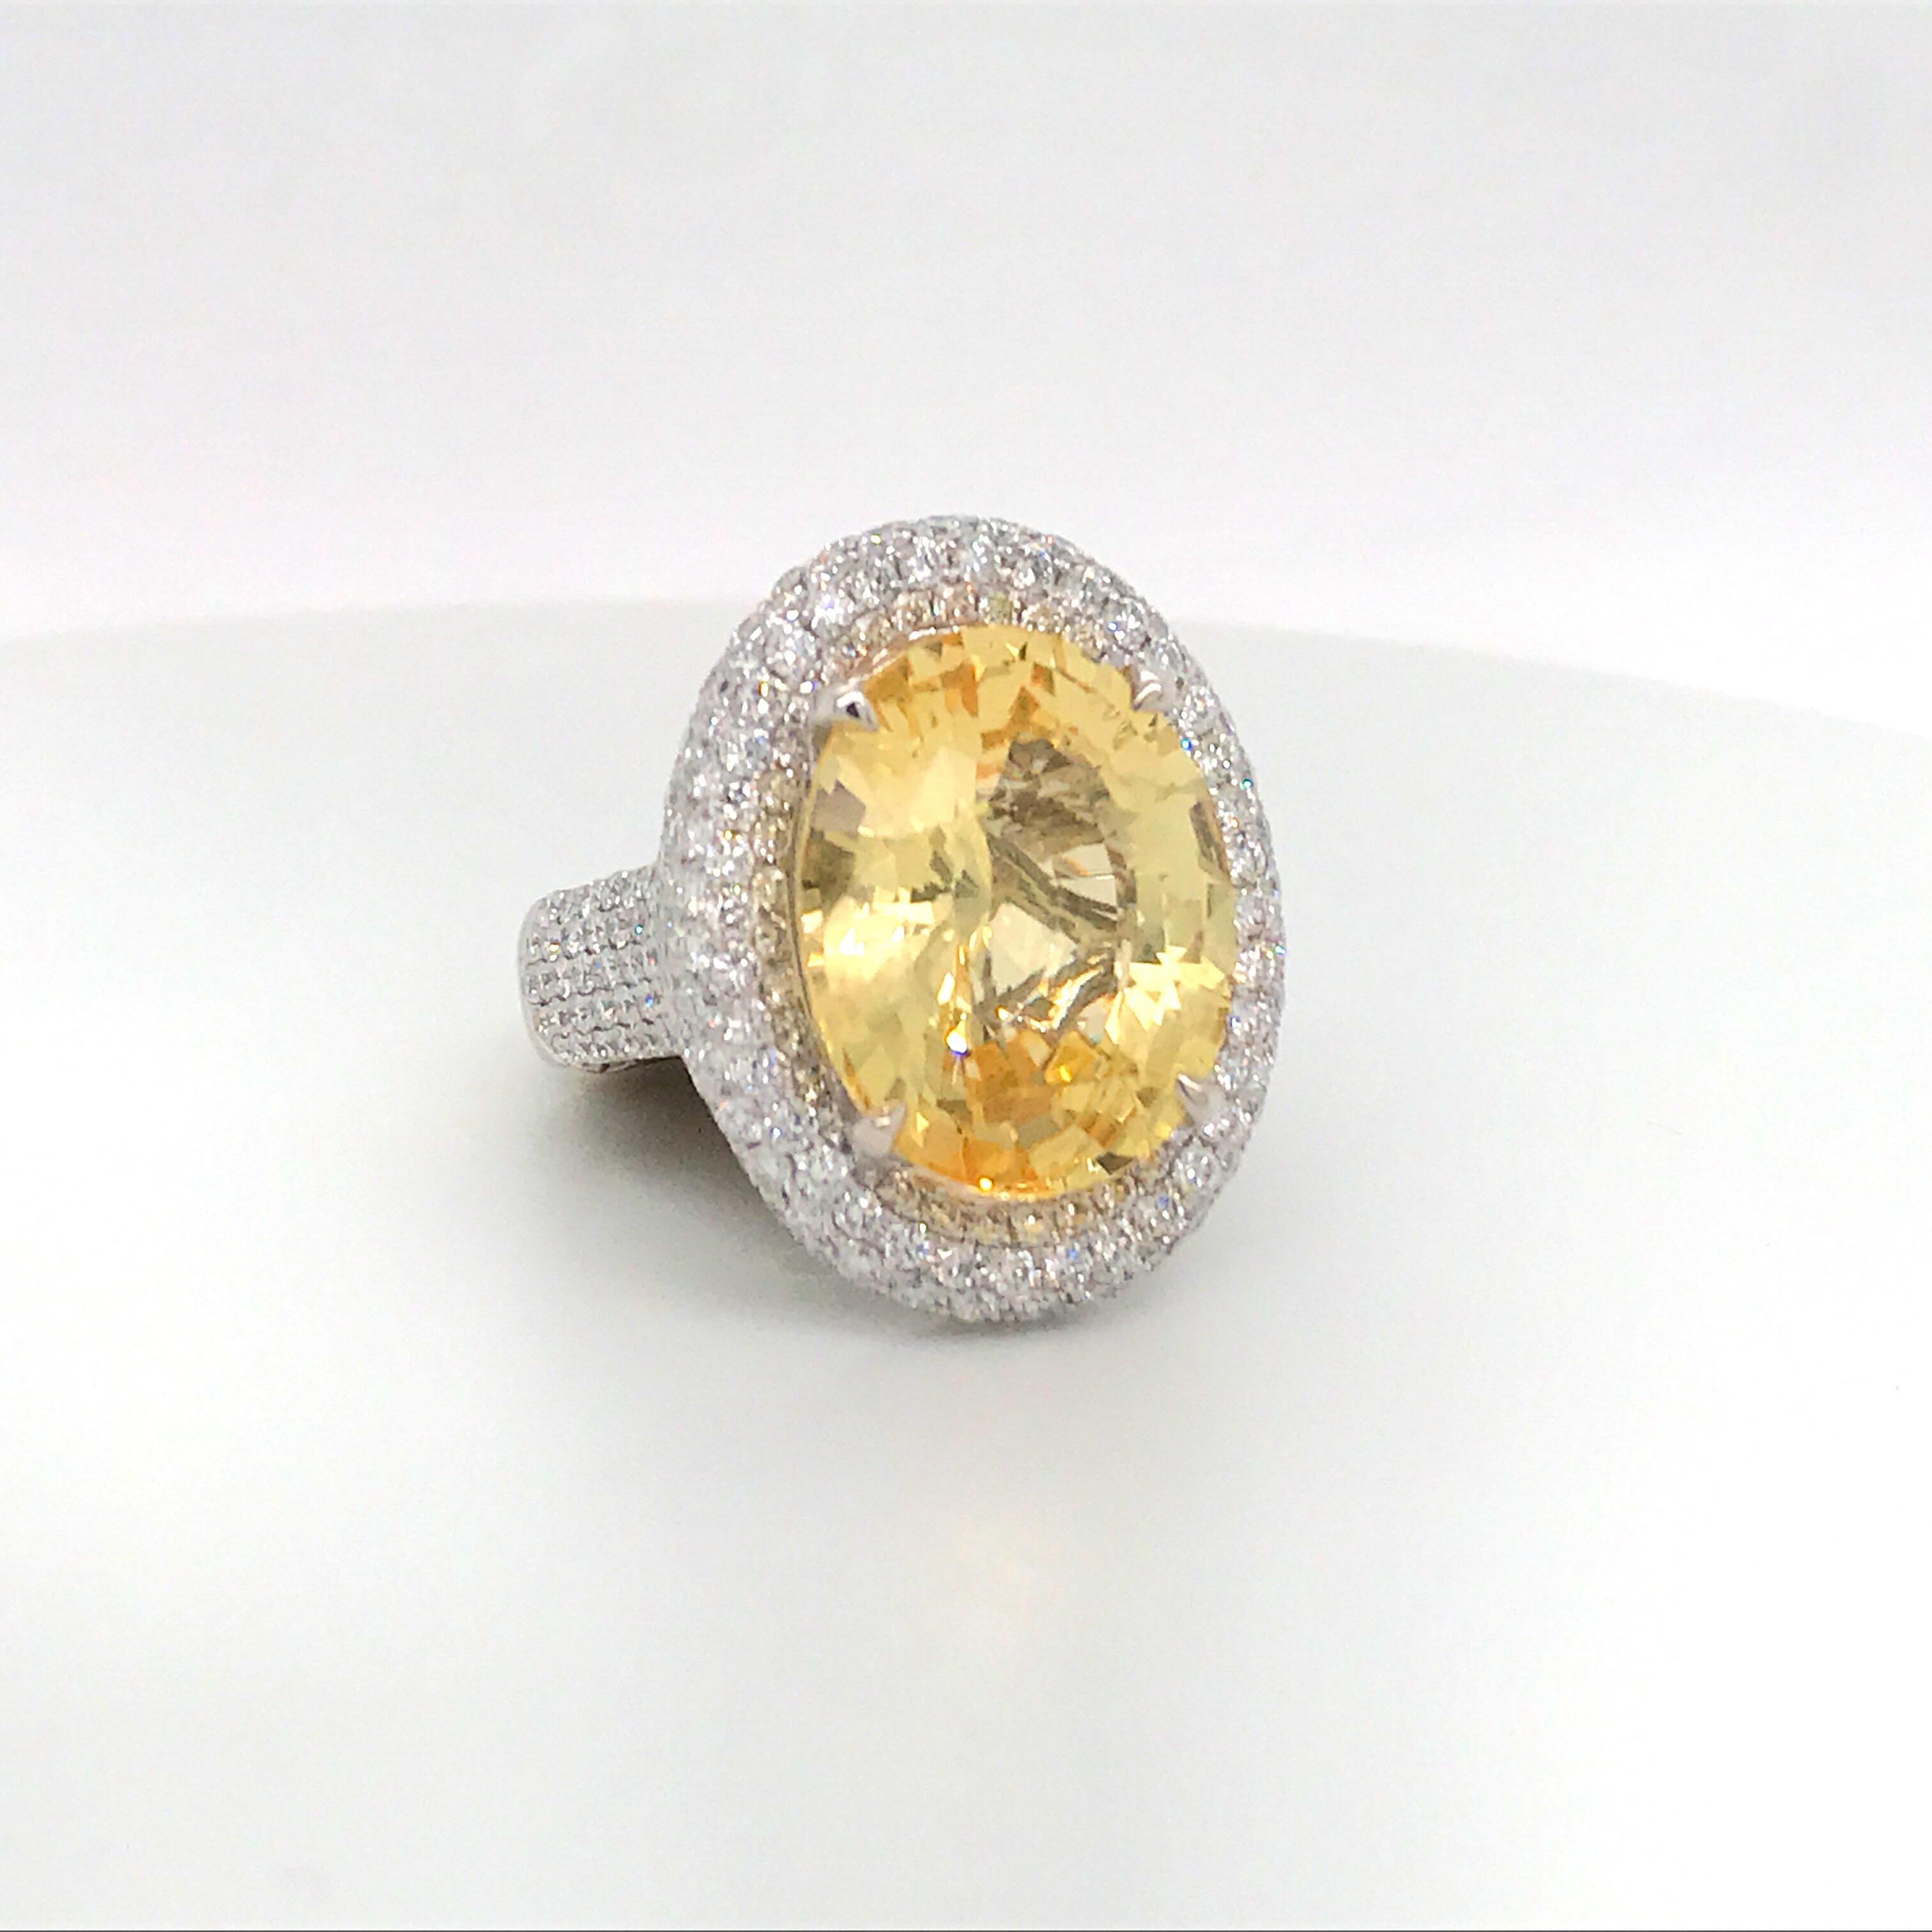 18K Yellow gold cocktail ring featuring one oval shape Yellow Sapphire weighing 14.84 carats flanked with numerous round brilliants weighing 3.08 carats.
Color G
Clarity VS-SI

Sapphire: 16.90 mm x 12.22mm
Ring: 19.57 mm x 23.87 mm

Ring is